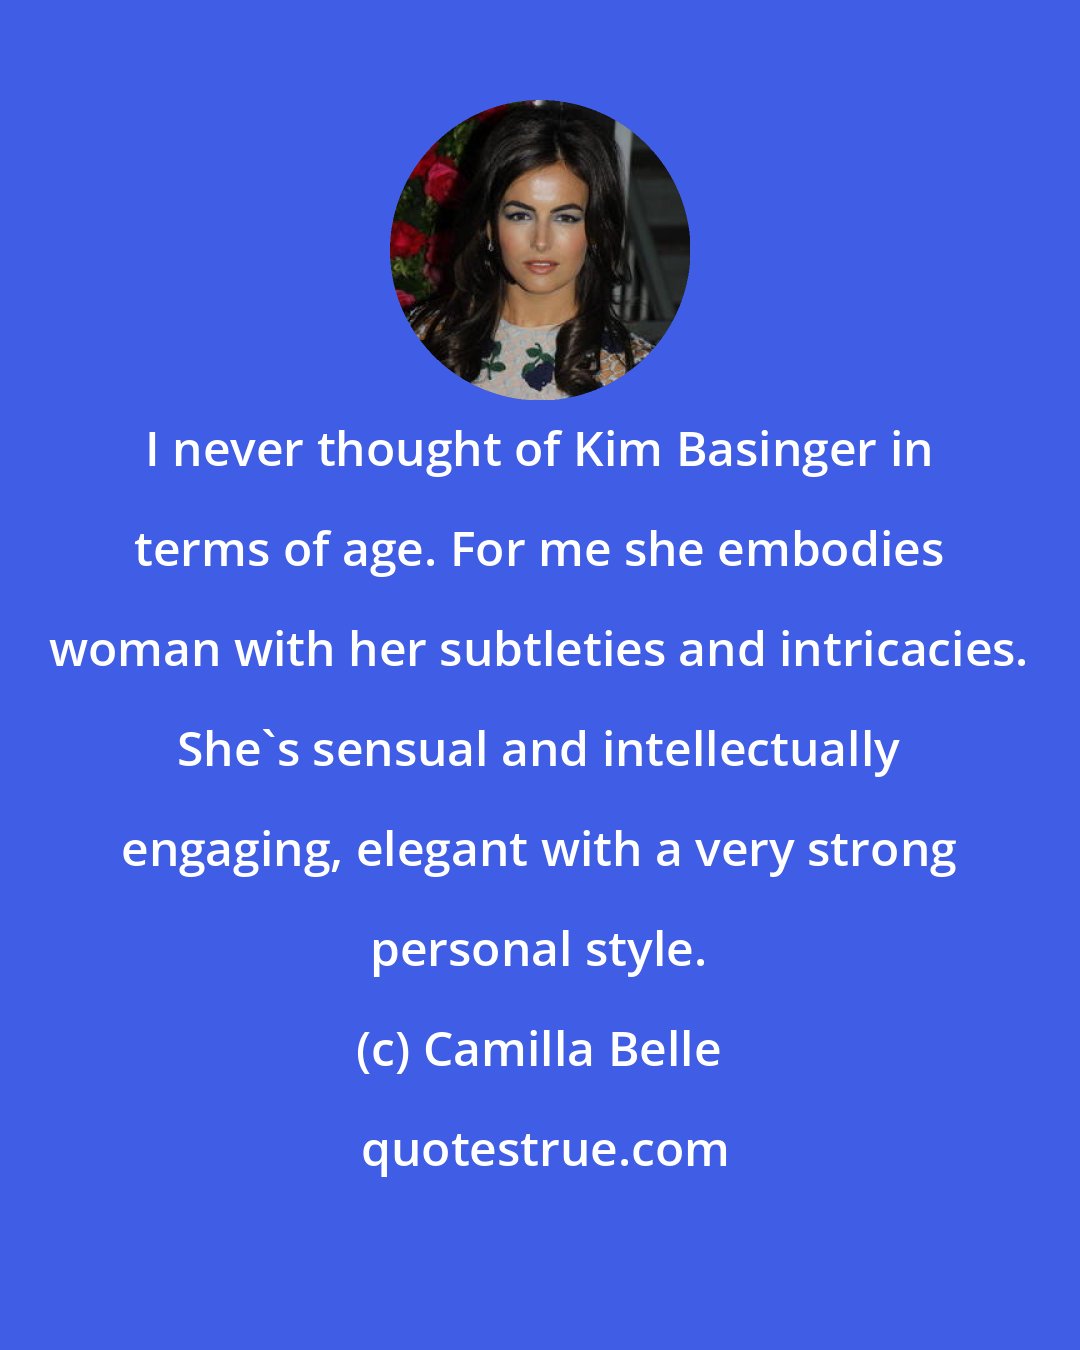 Camilla Belle: I never thought of Kim Basinger in terms of age. For me she embodies woman with her subtleties and intricacies. She's sensual and intellectually engaging, elegant with a very strong personal style.